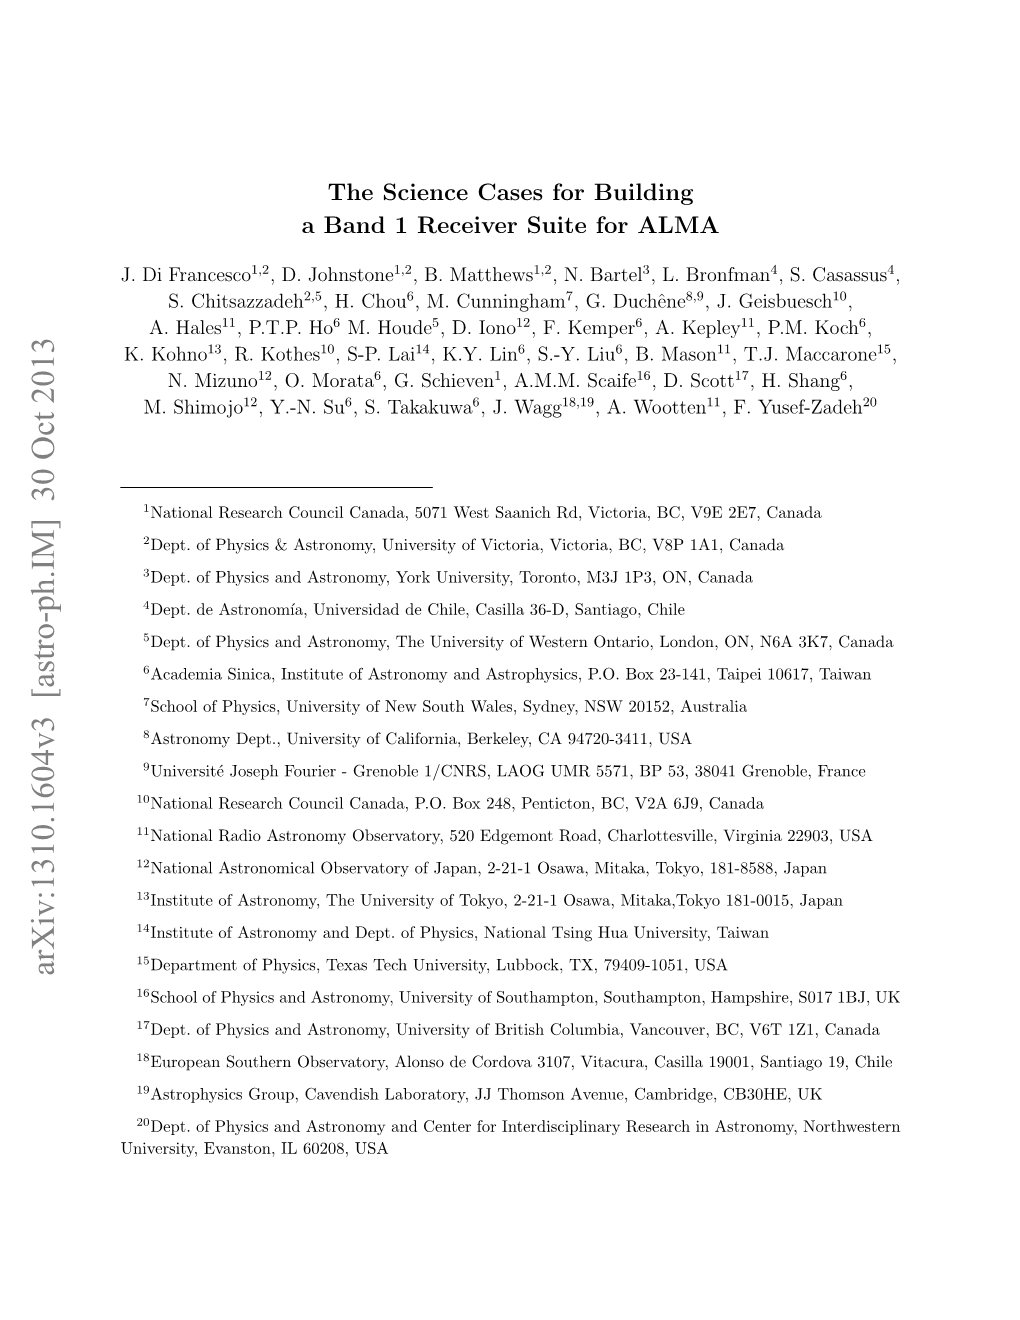 The Science Cases for Building a Band 1 Receiver Suite for ALMA